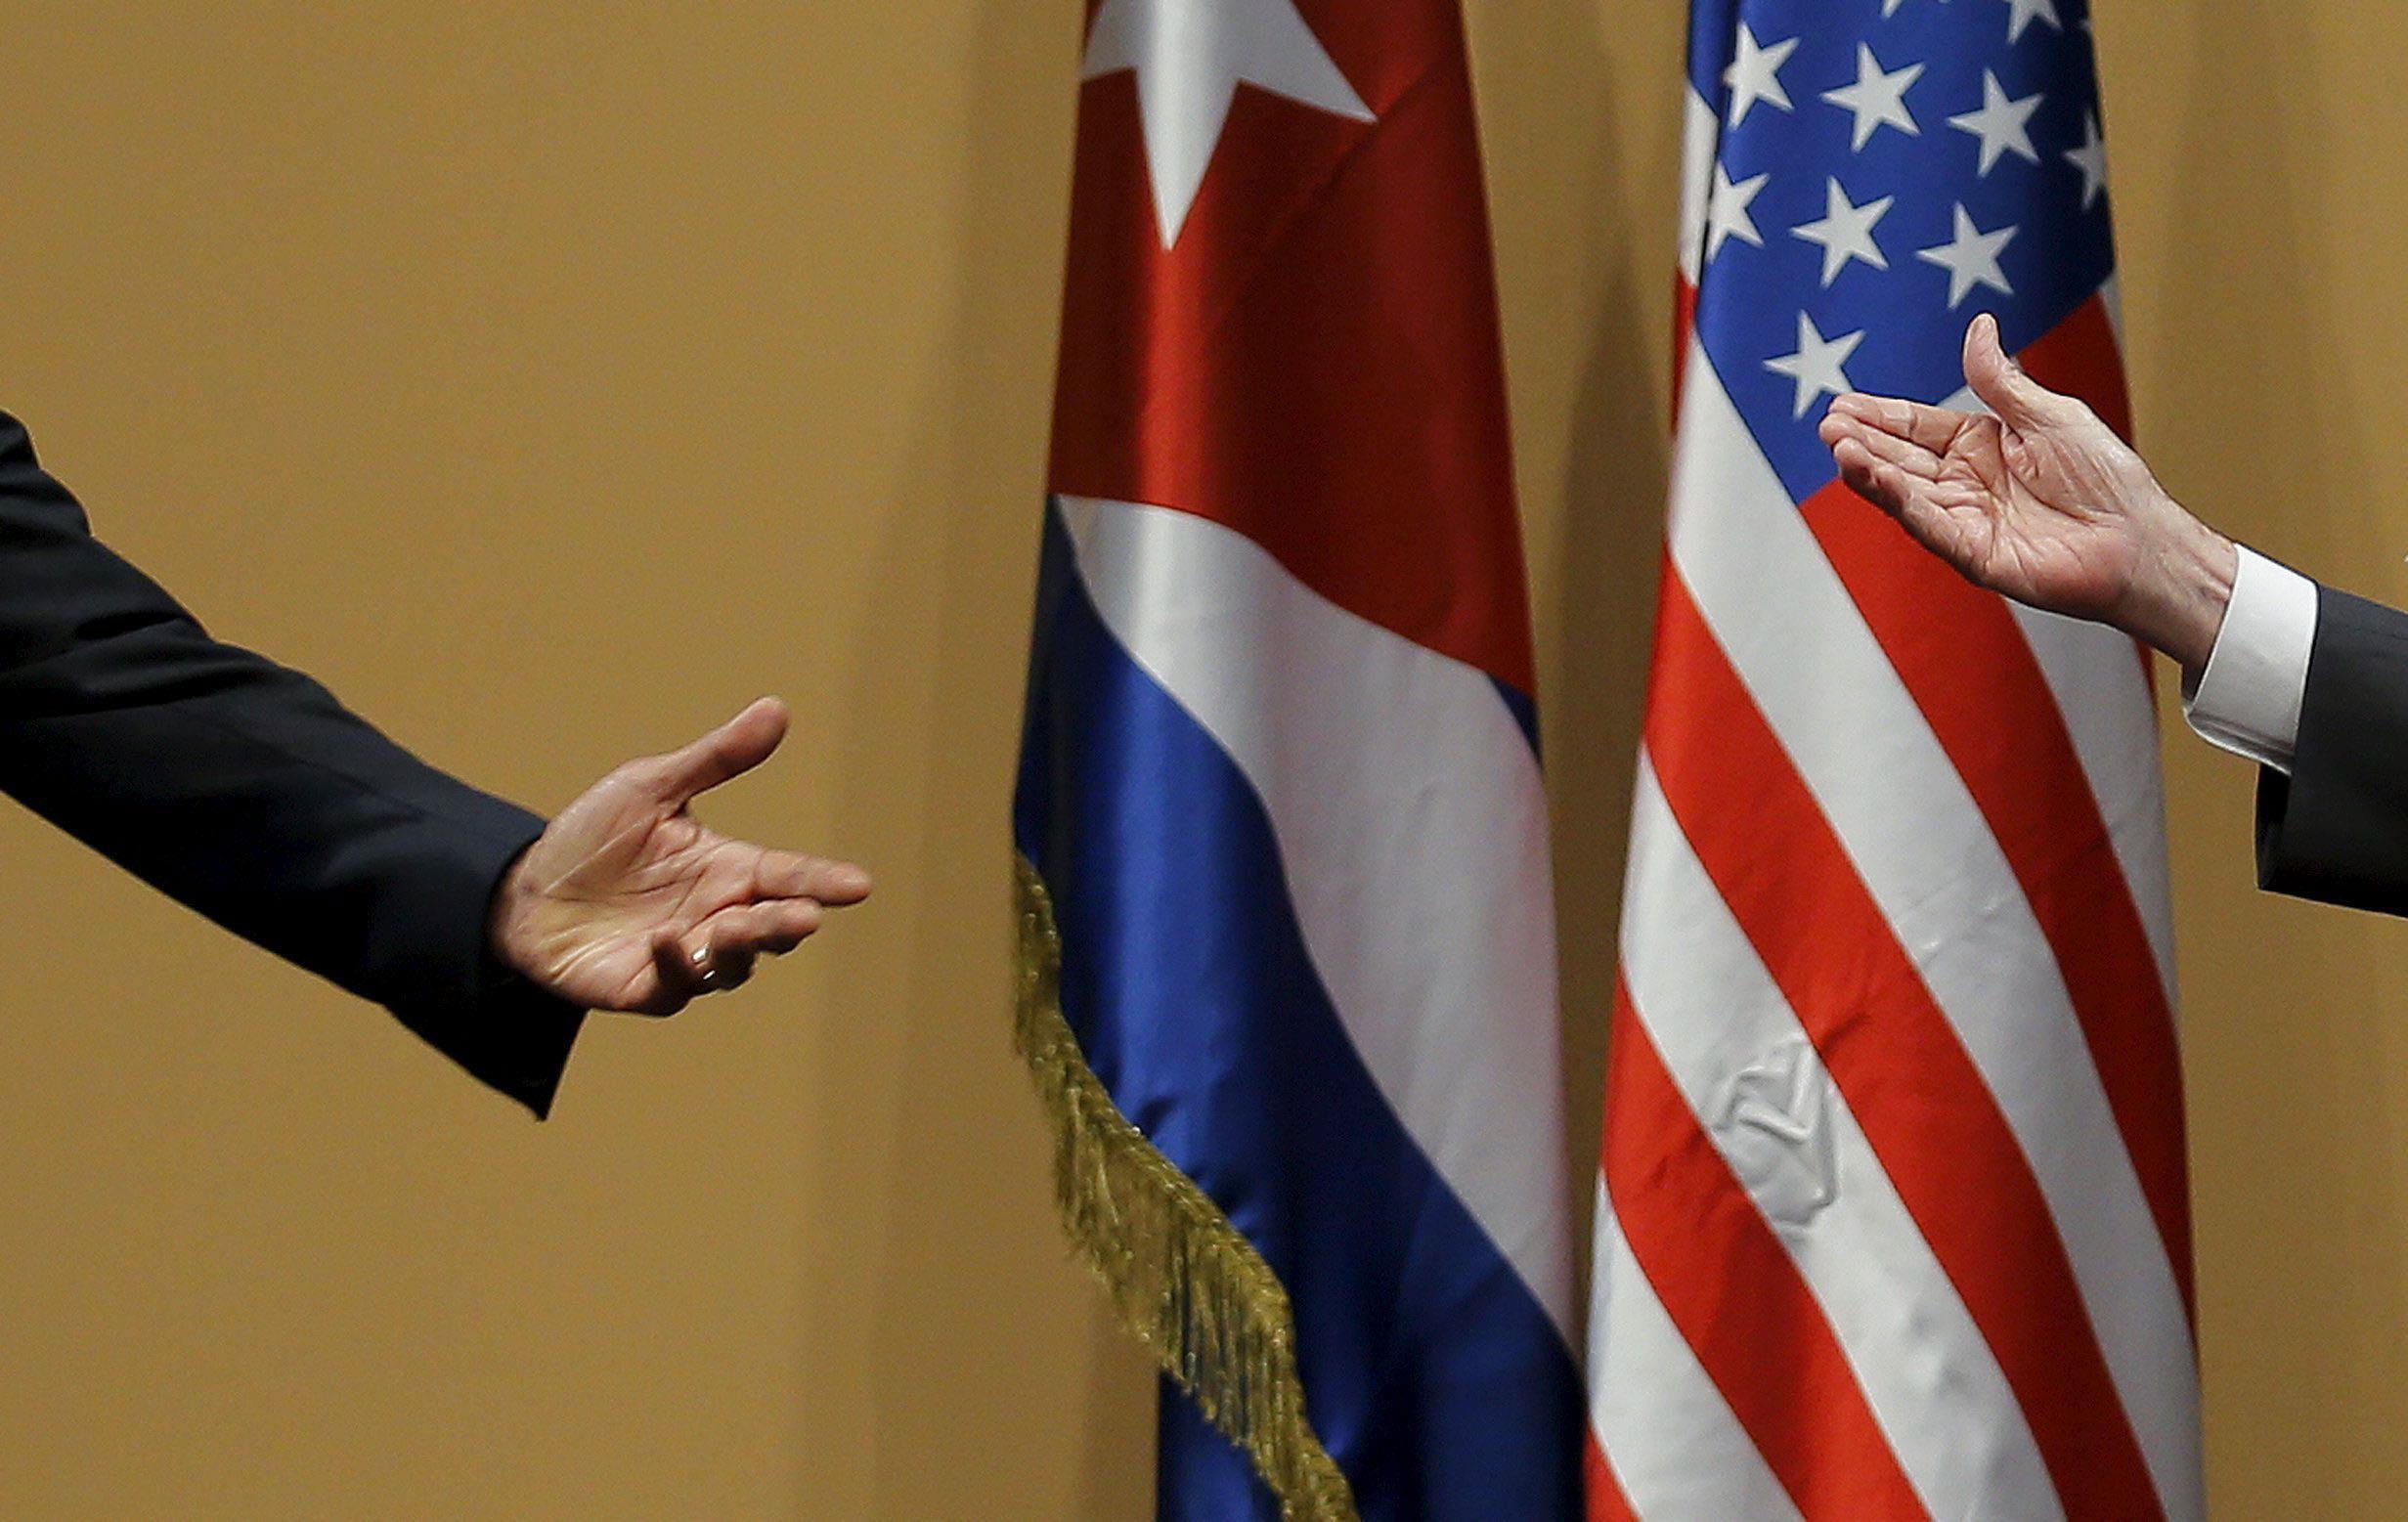 The hands of U.S. President Barack Obama and Cuban President Raul Castro are seen during a news conf